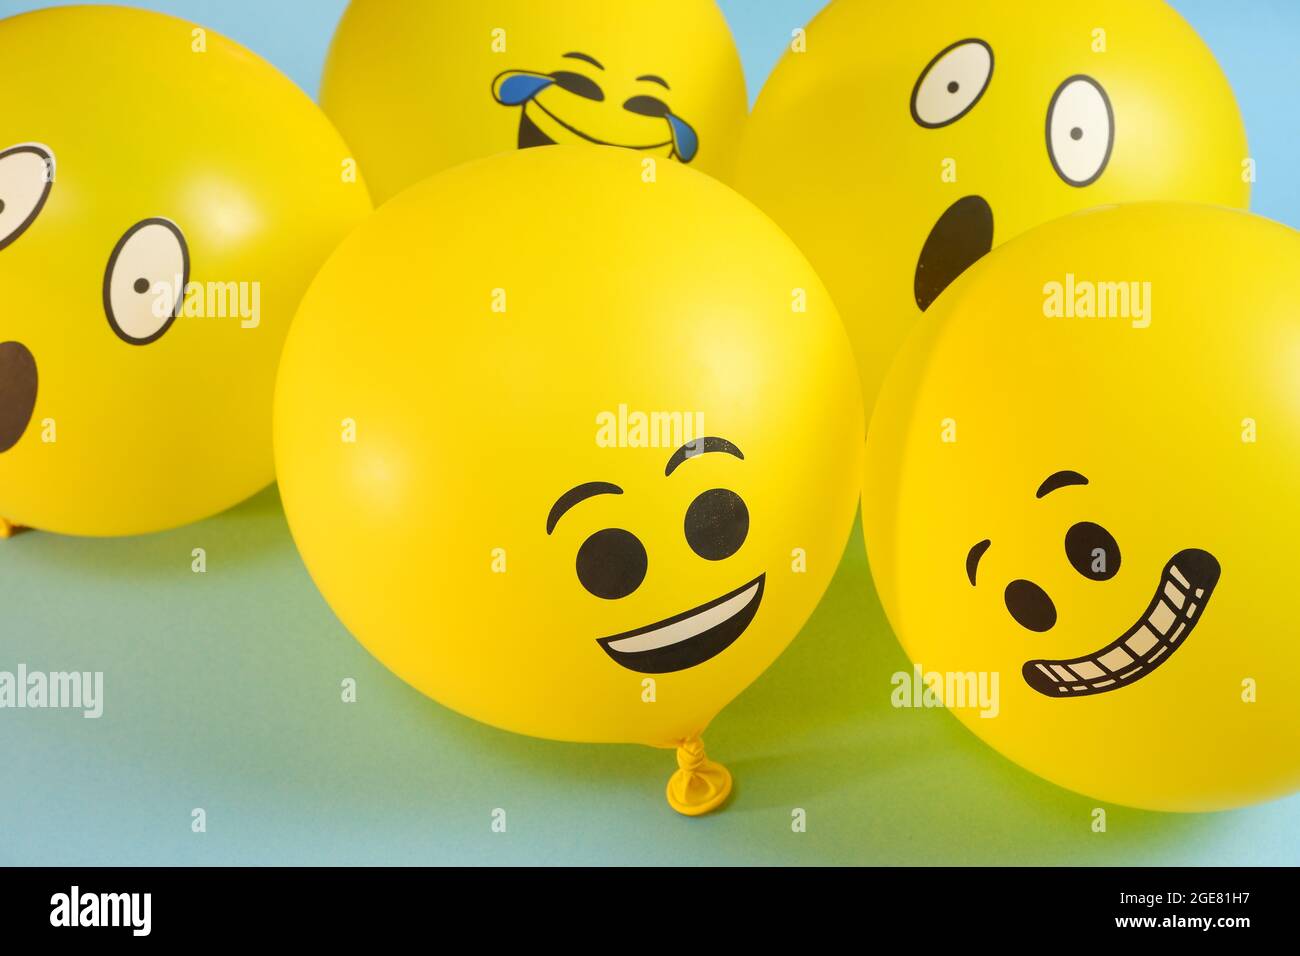 Yellow emoji balloons on a blue background. Stock Photo